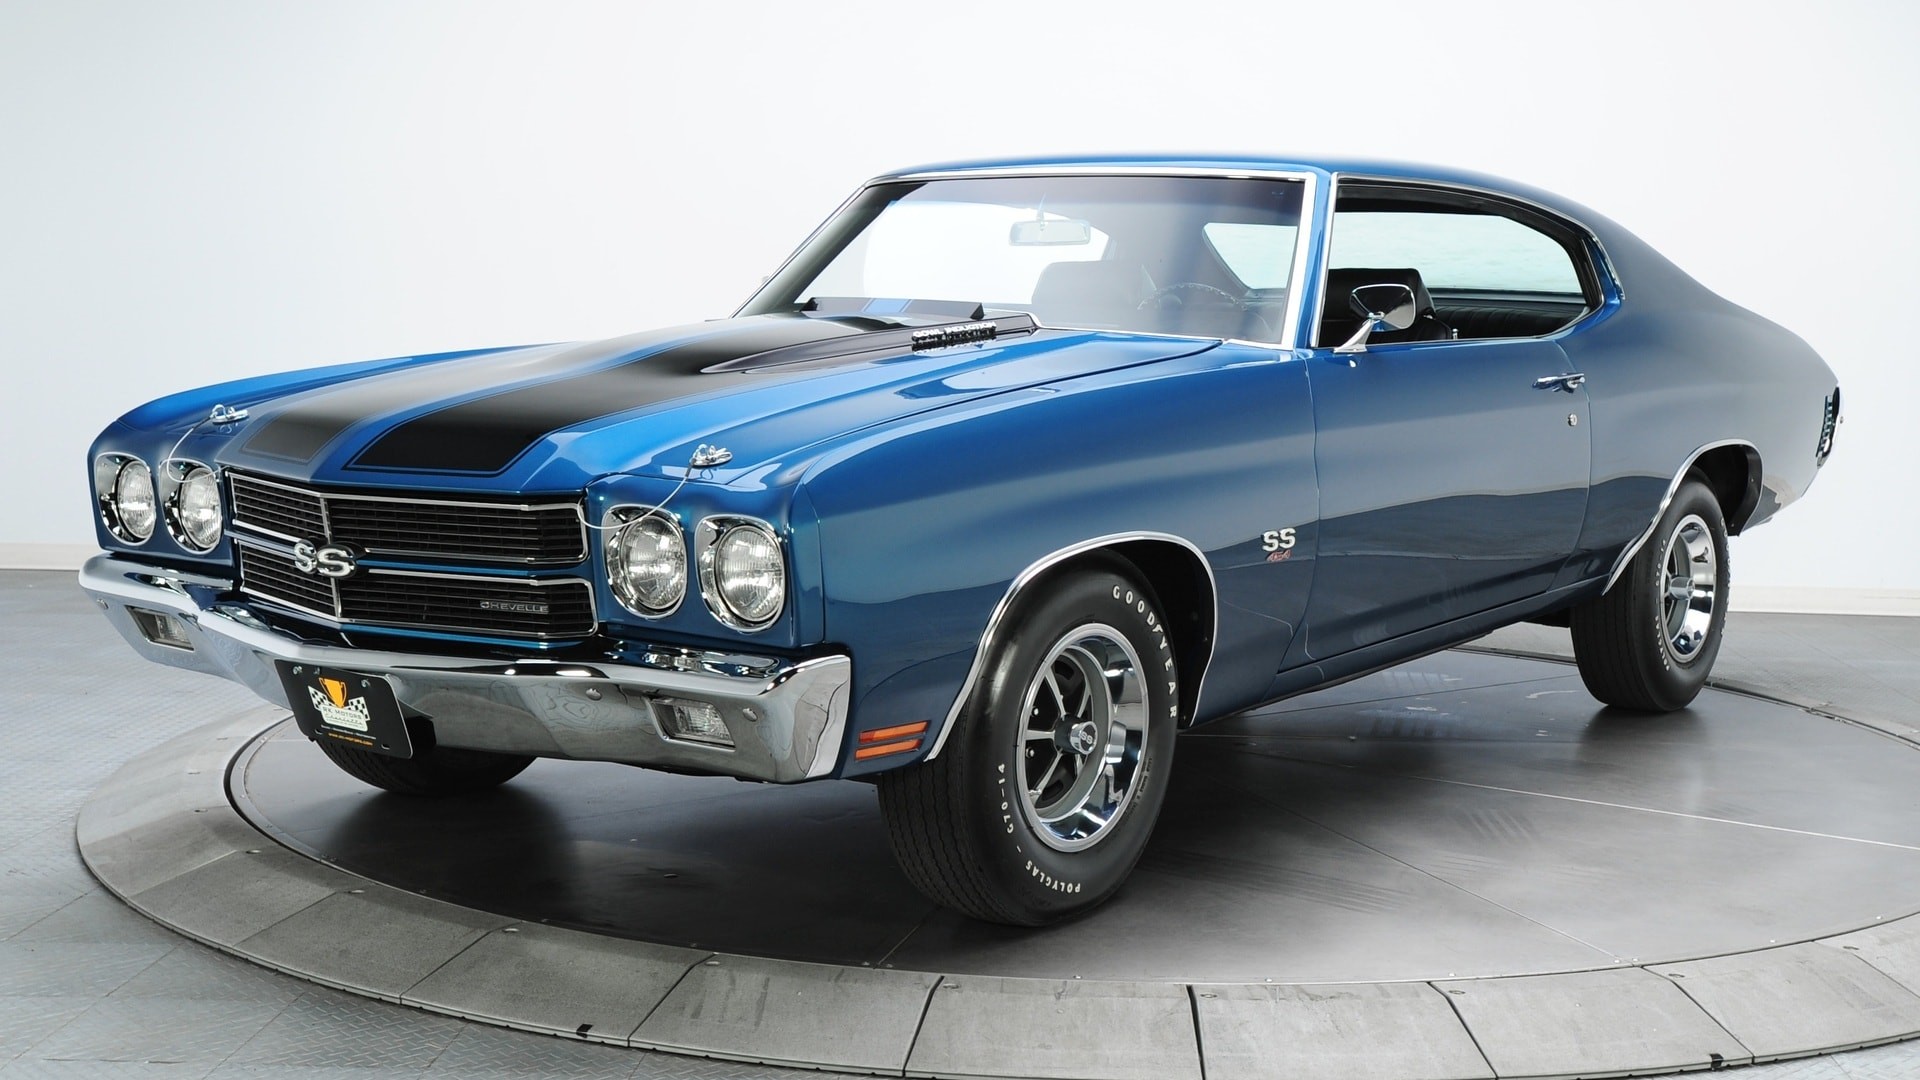 1920x1080 1970 Chevrolet Chevelle SS Wallpapers